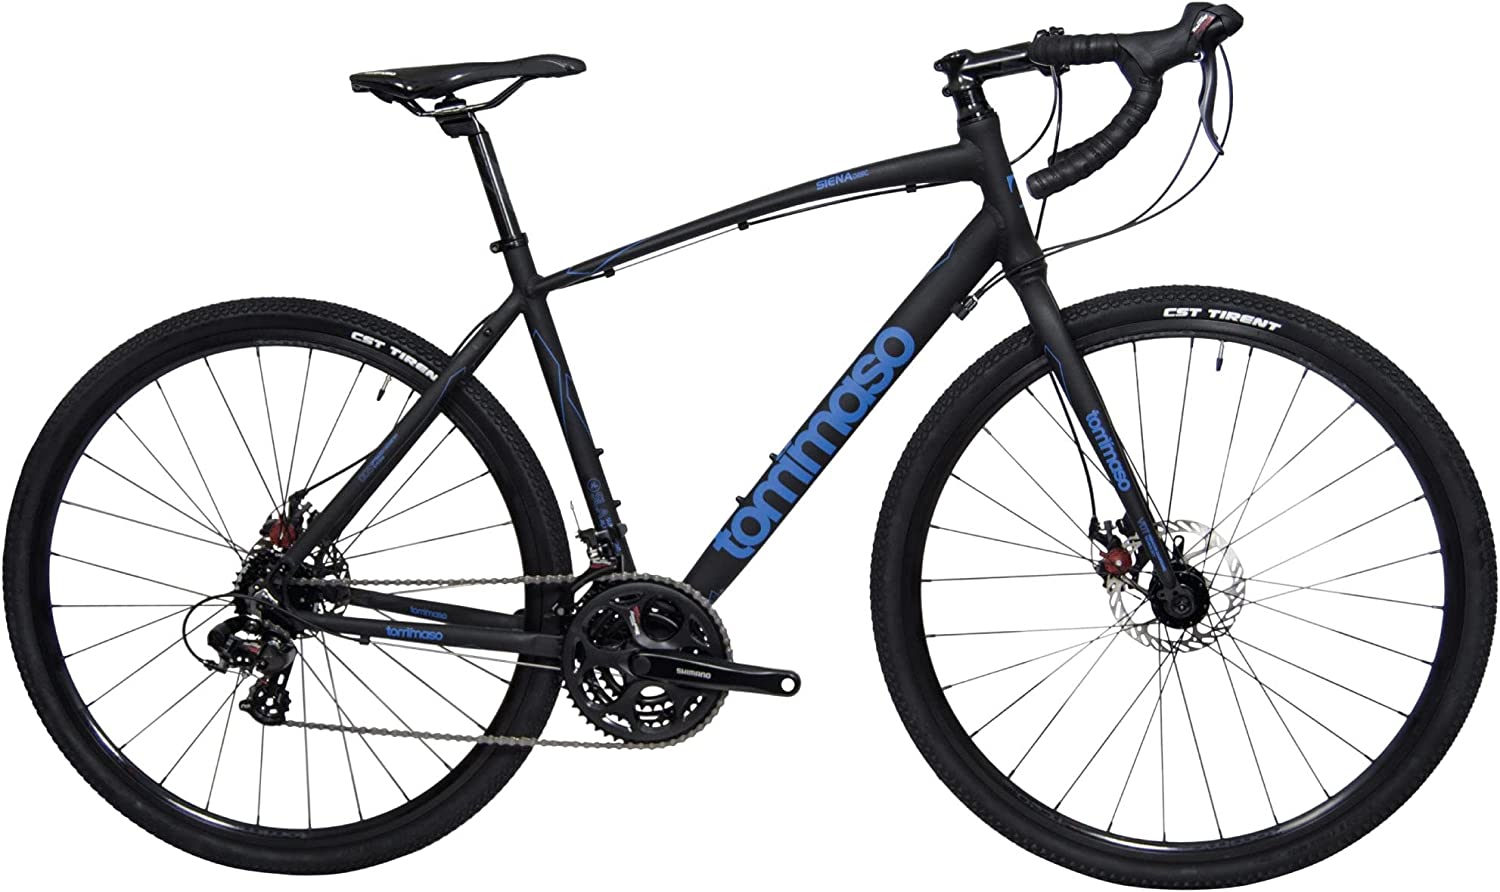 Tommaso Siena Gravel Bike, Shimano Tourney Adventure Bike with Disc Brakes, Extra Wide Tires, Perfect for Road Or Dirt Touring